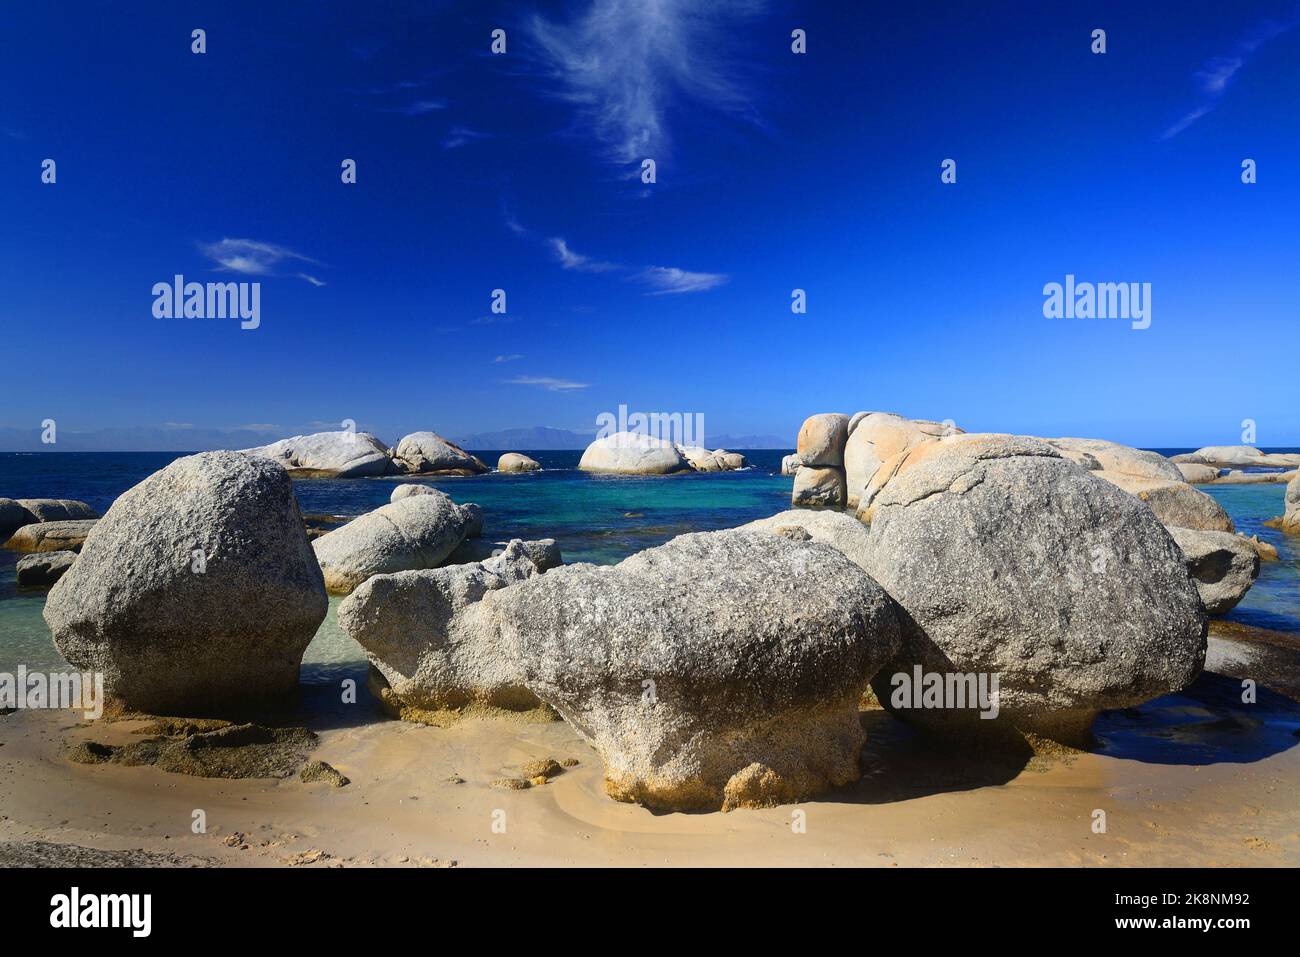 A circle of rocks around water on Boulders Beach, Simon's Town, South Africa Stock Photo